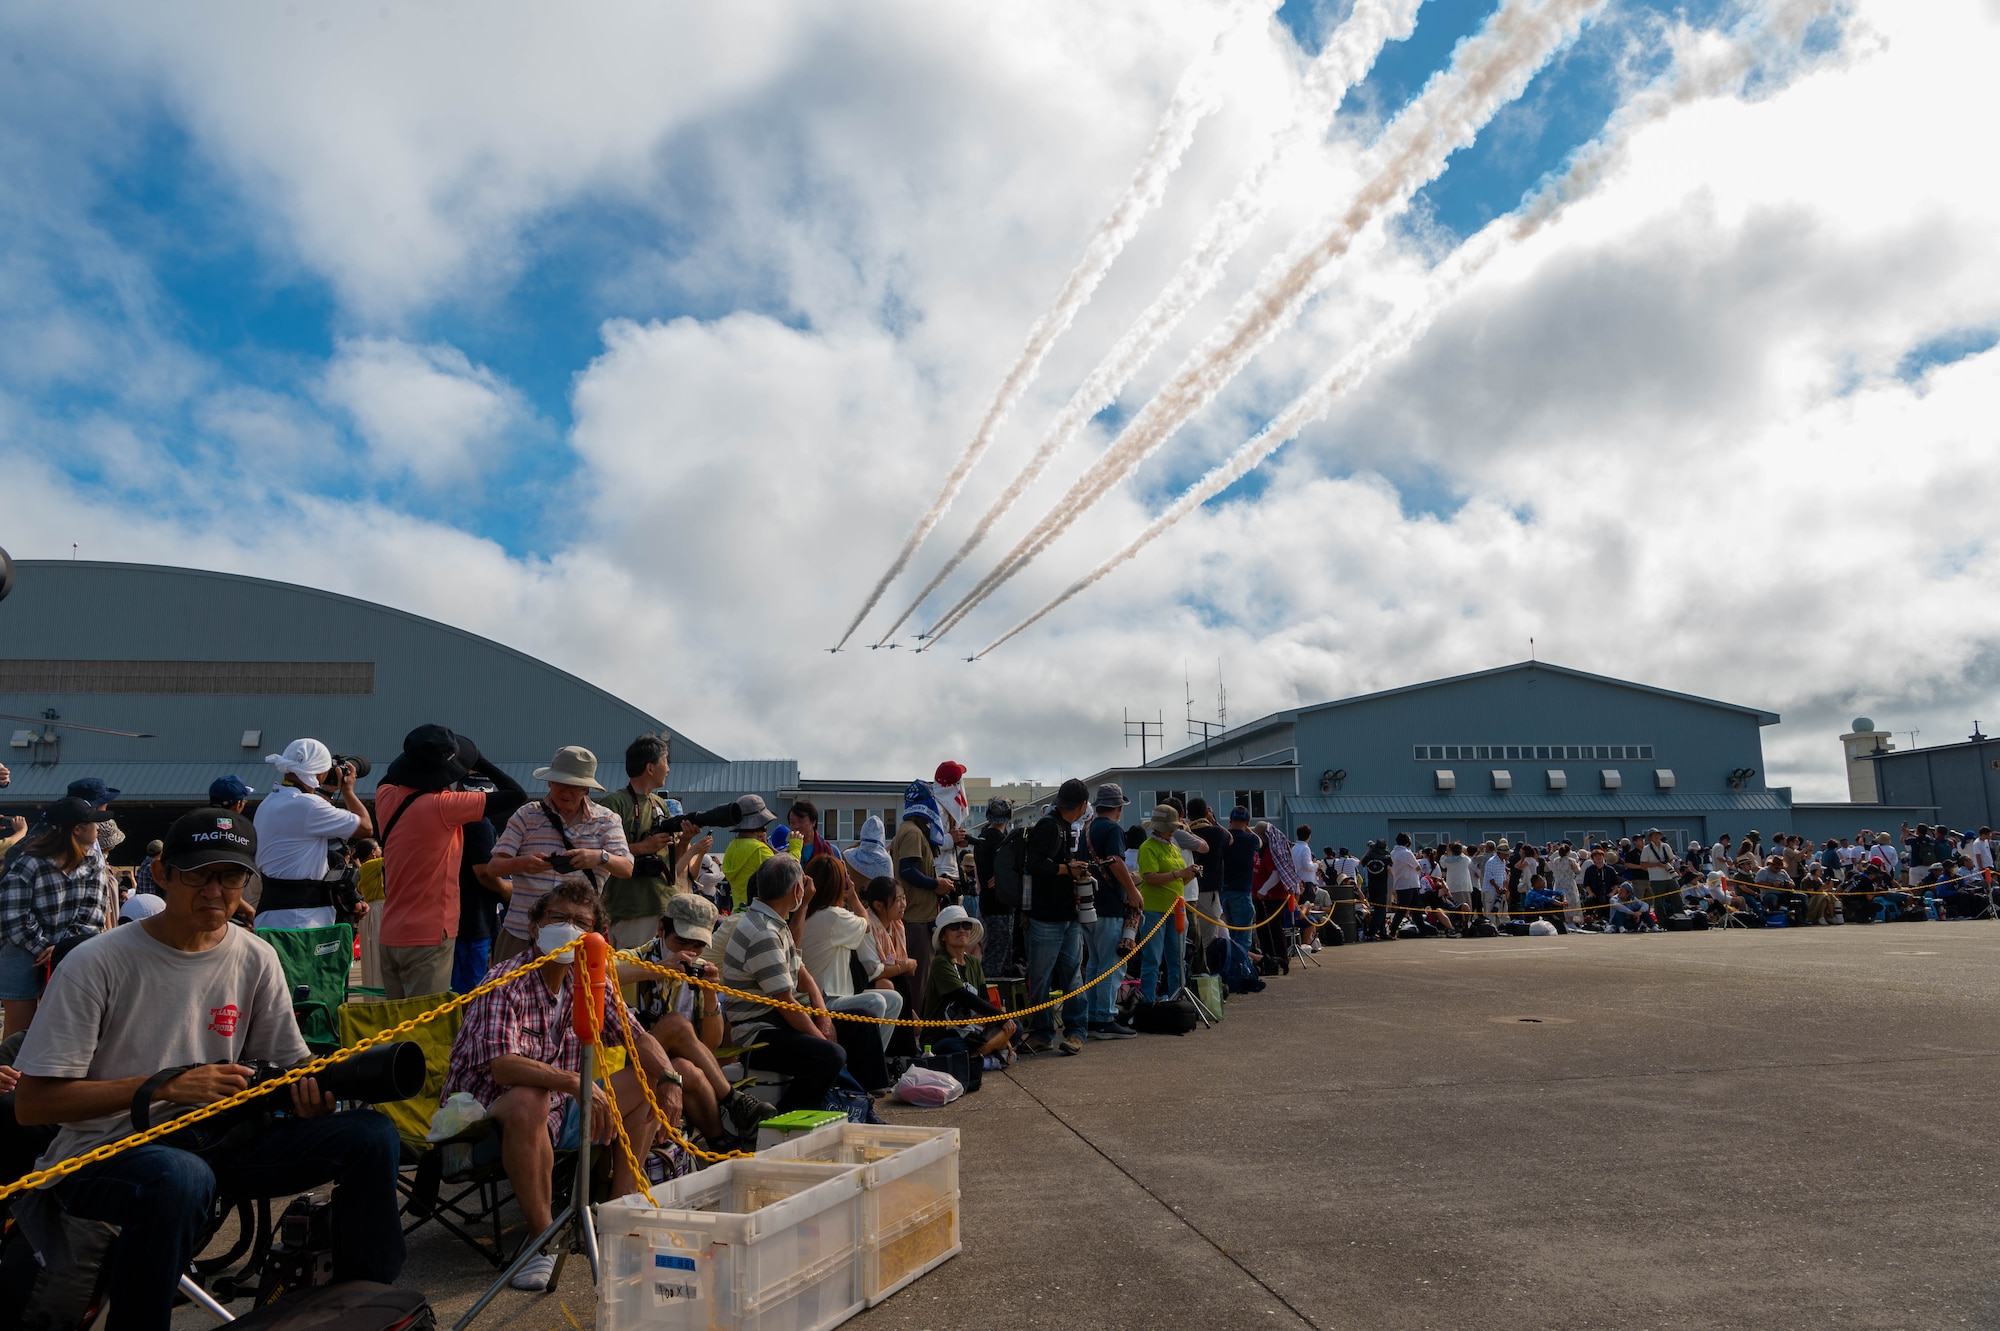 Attendees watch a flyover by jets during Misawa Air Fest 2023